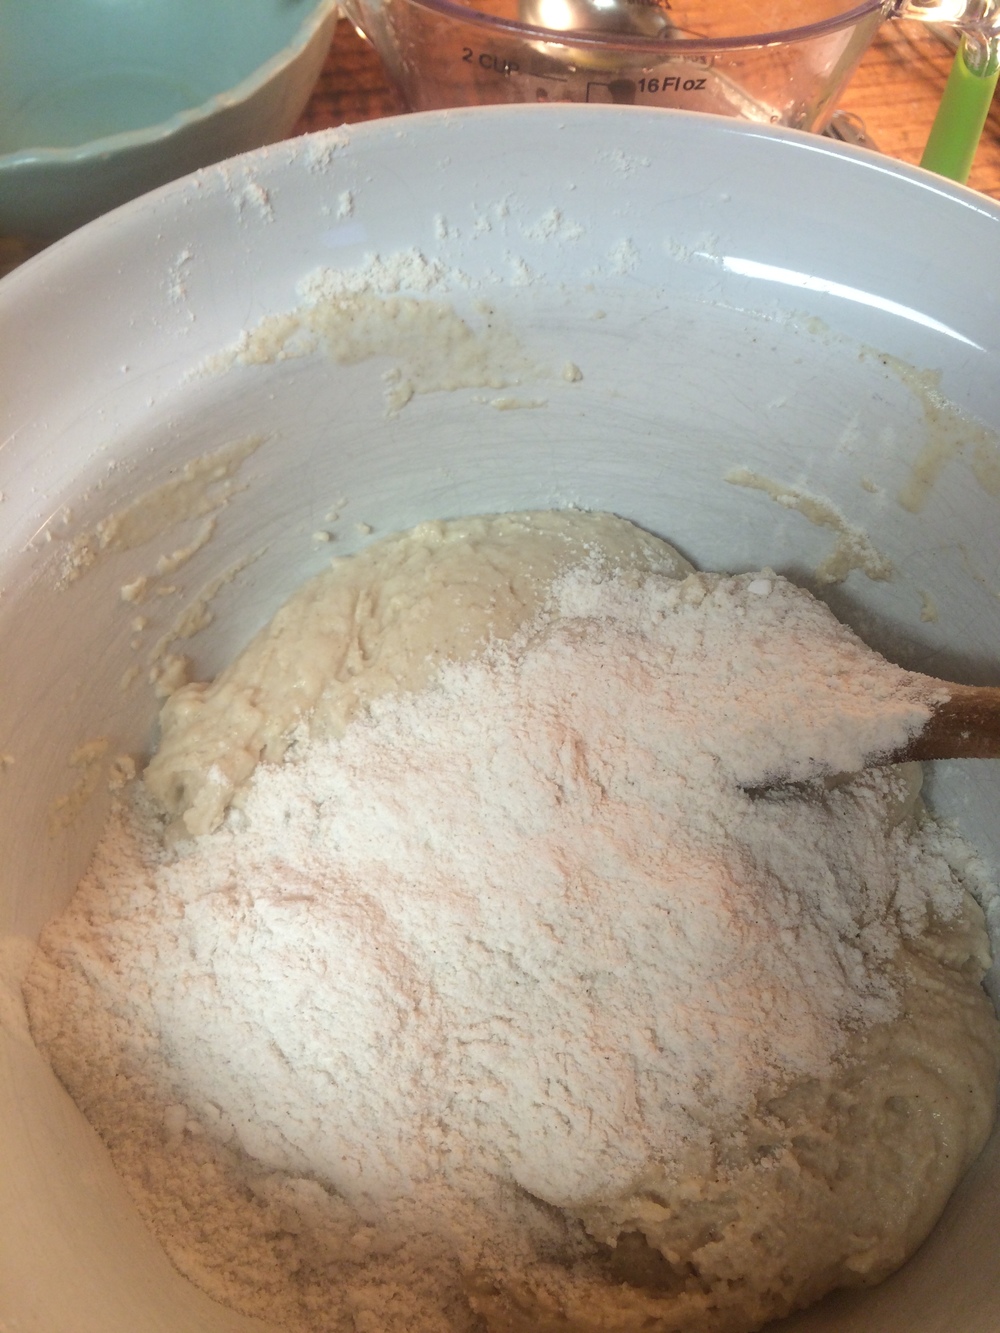 maybe a teensy bit more flour?